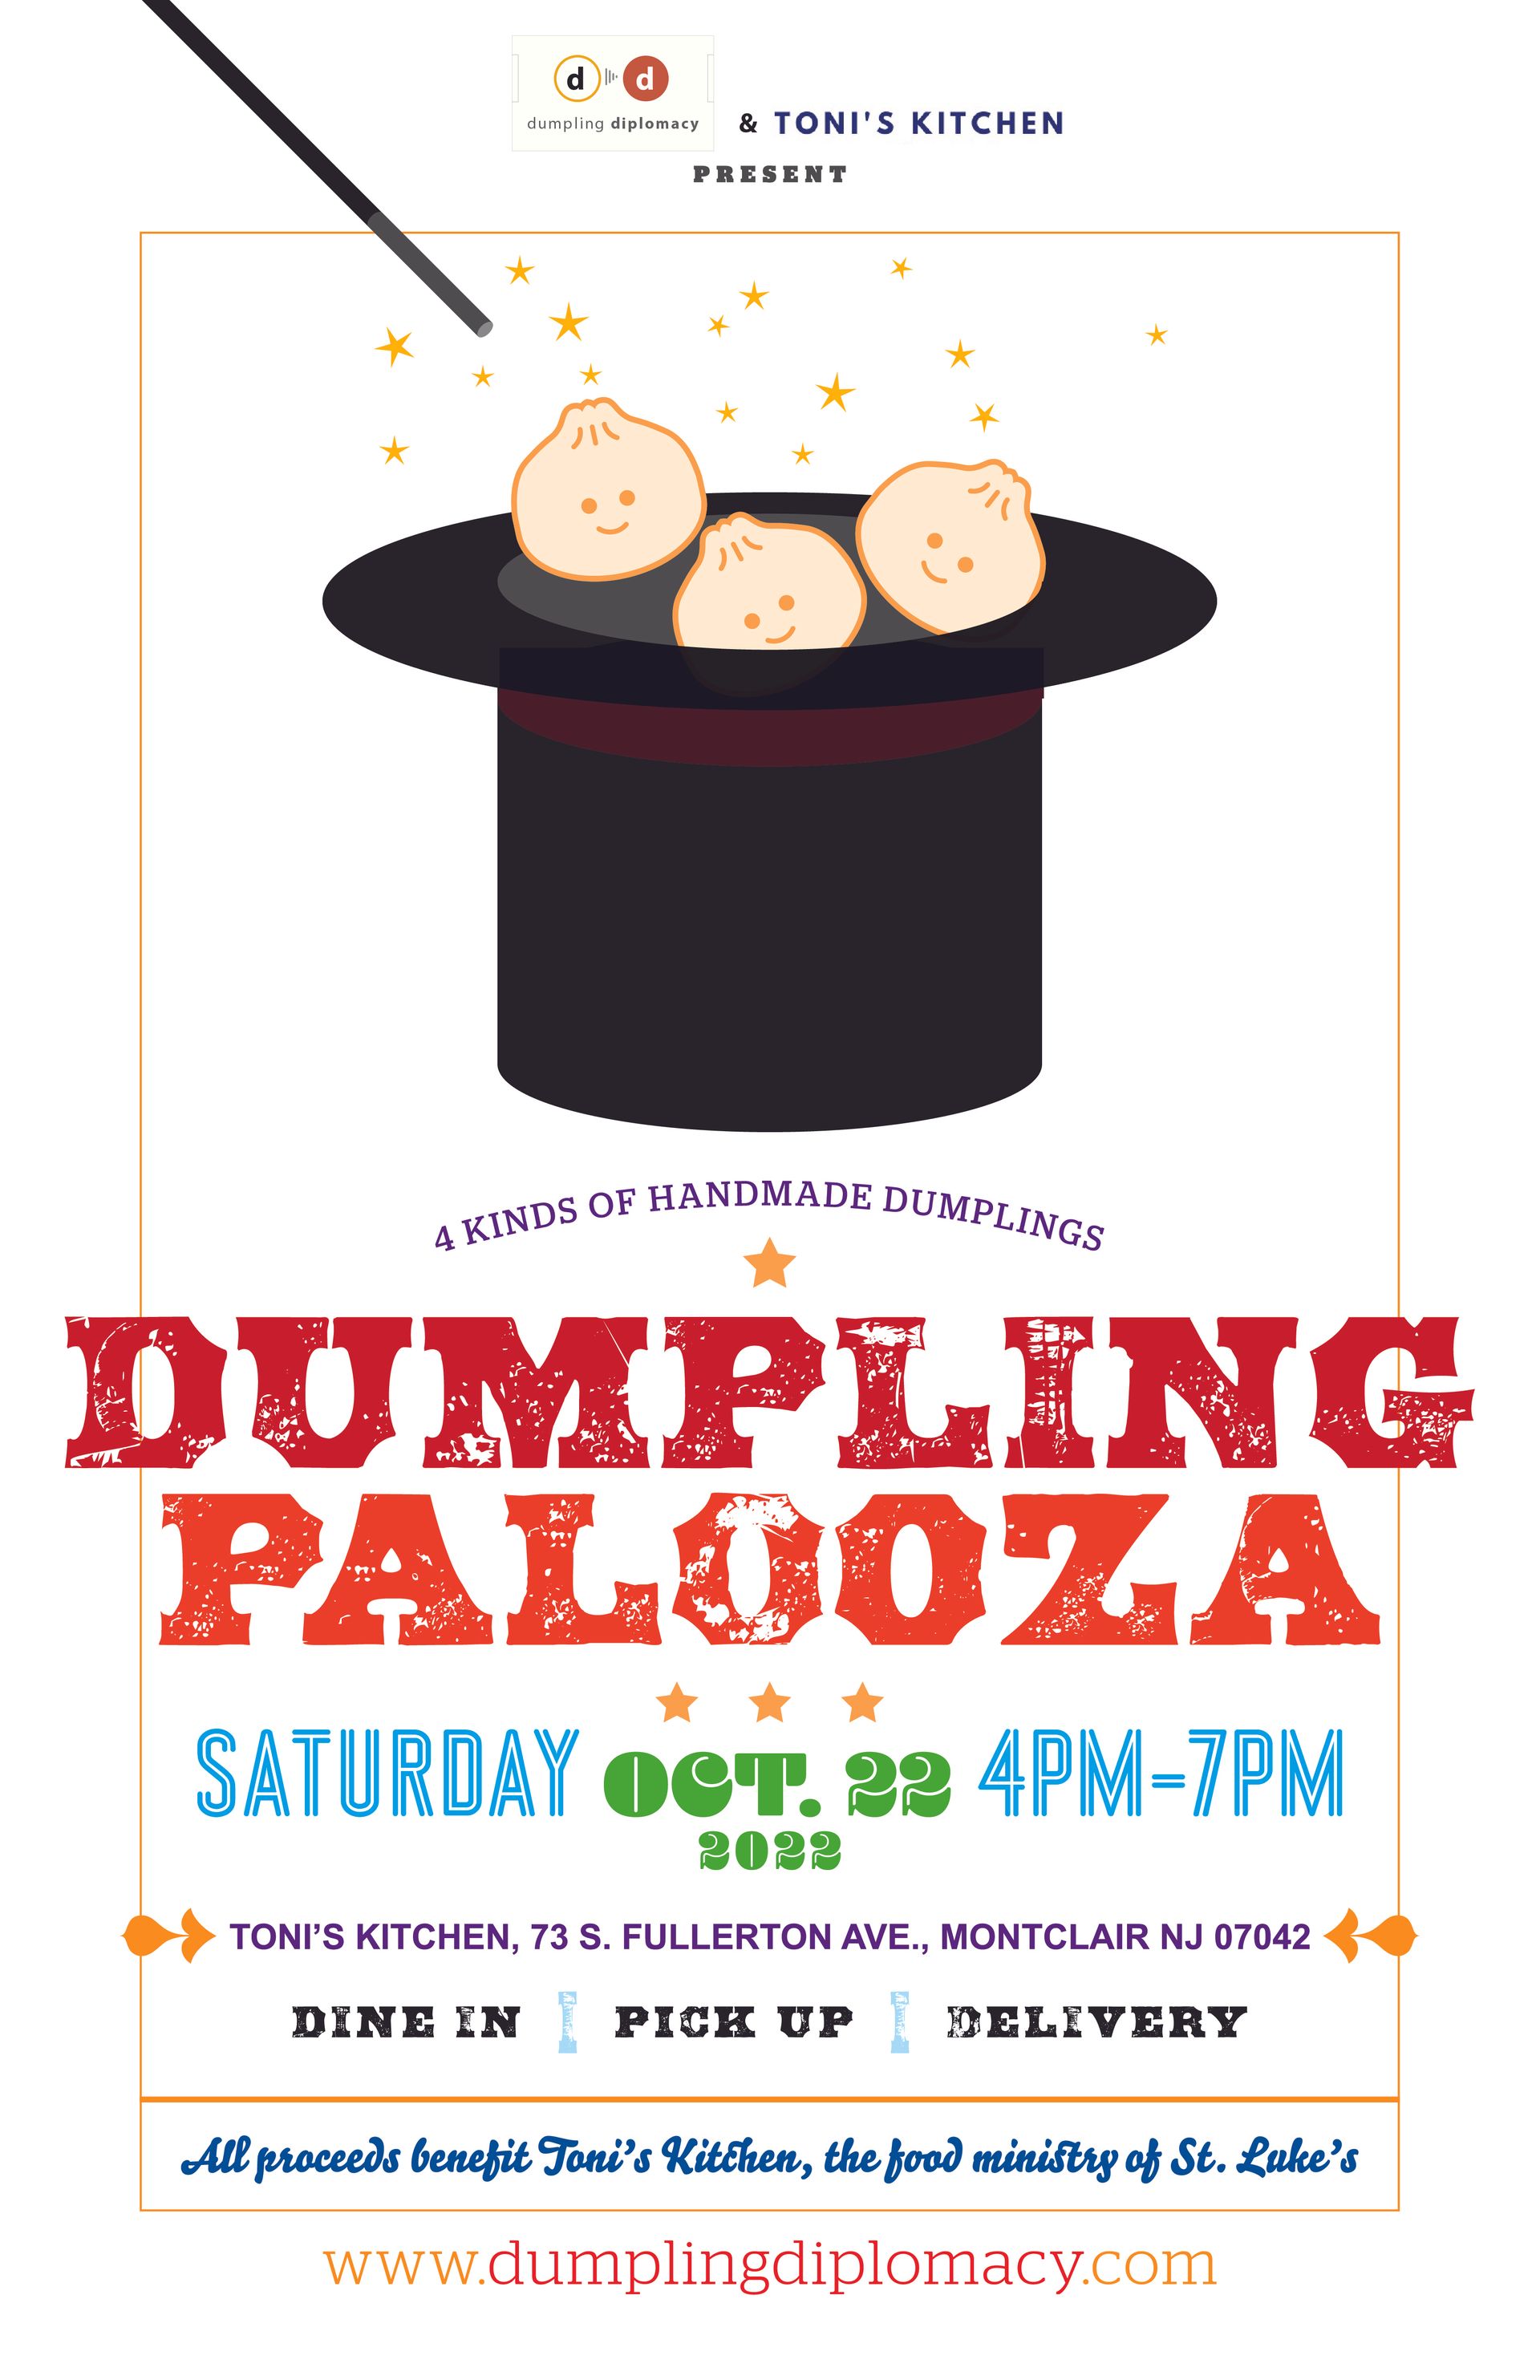 A poster for dumpling palooza on saturday october 22